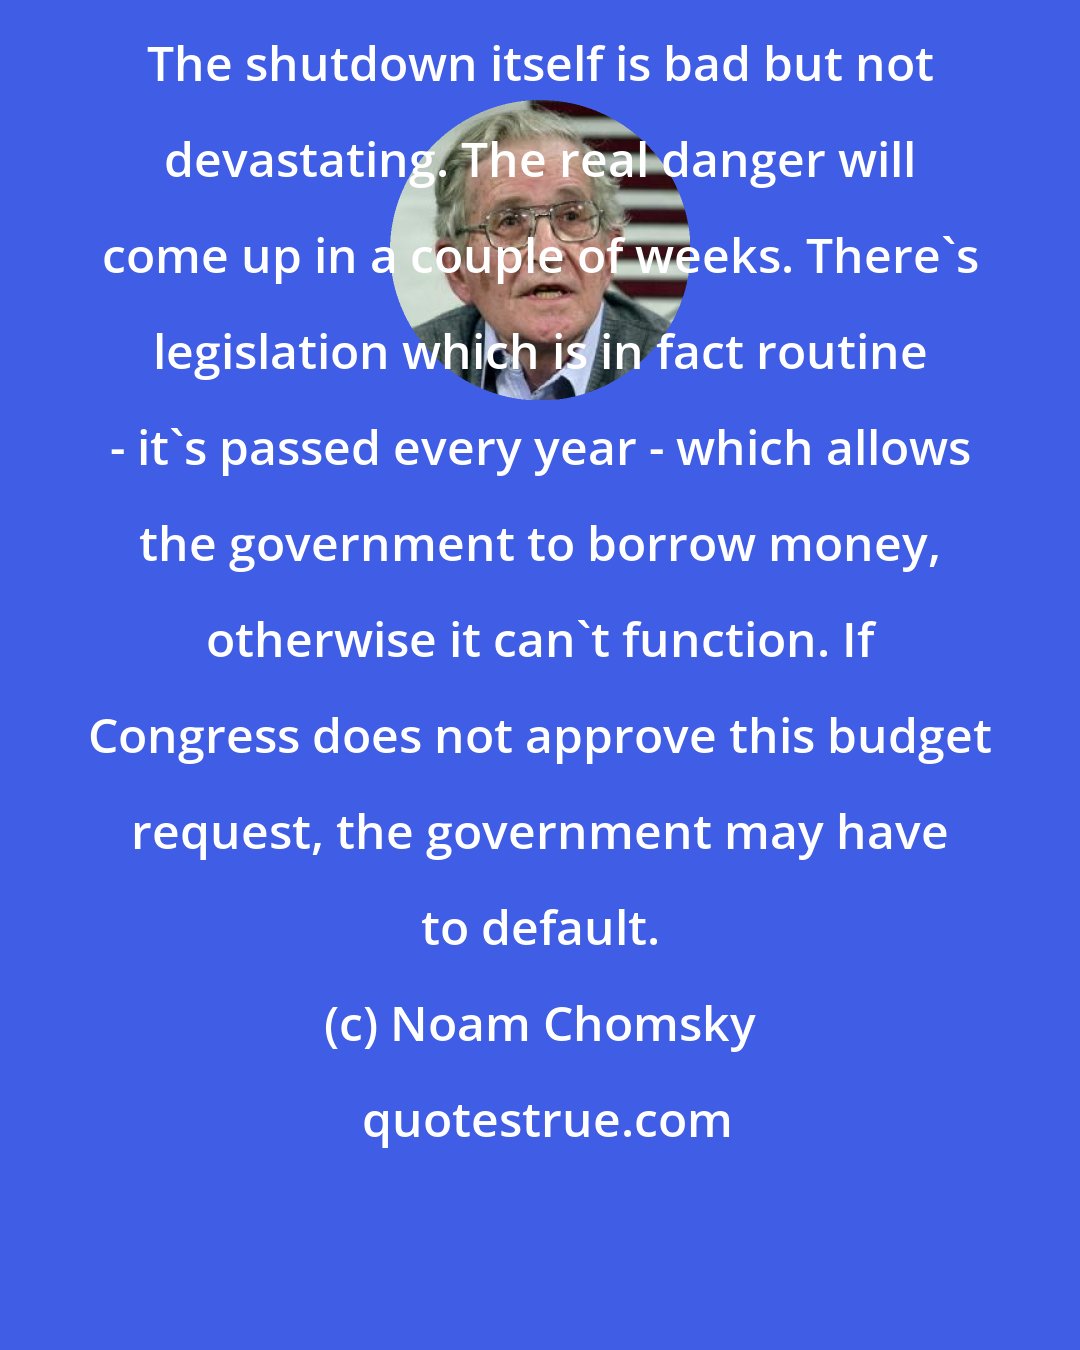 Noam Chomsky: The shutdown itself is bad but not devastating. The real danger will come up in a couple of weeks. There's legislation which is in fact routine - it's passed every year - which allows the government to borrow money, otherwise it can't function. If Congress does not approve this budget request, the government may have to default.